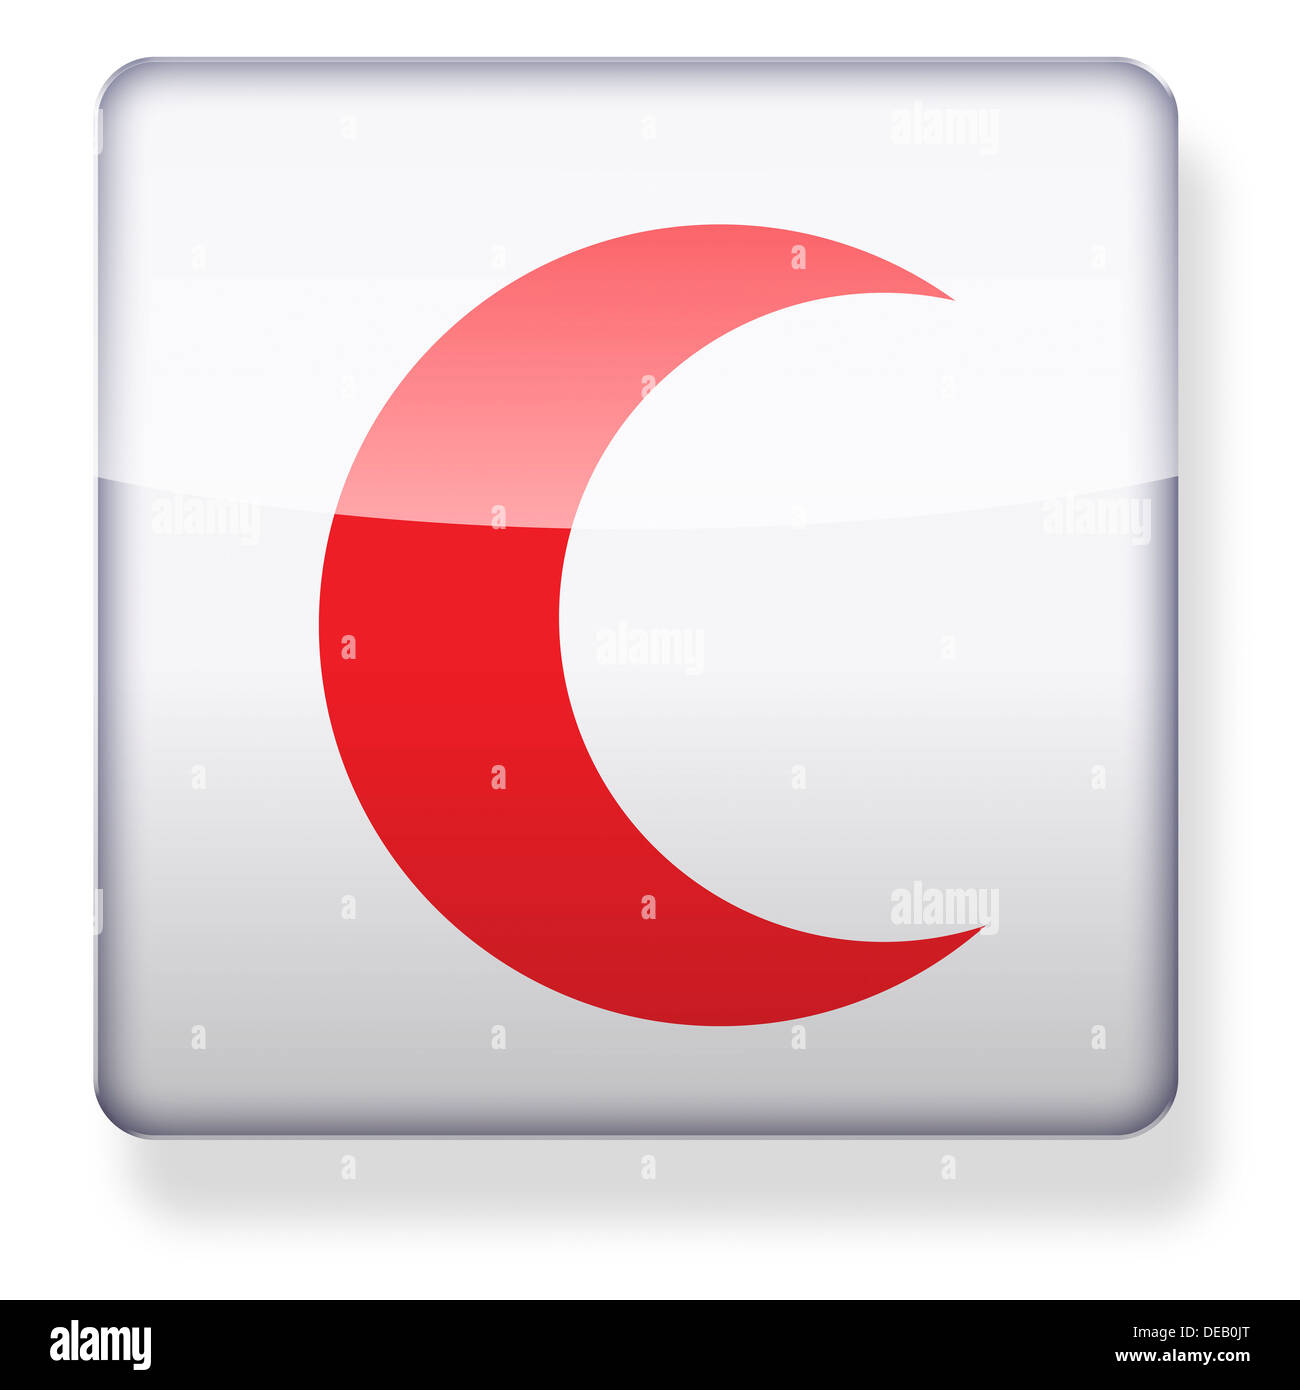 Red Crescent logo as an app icon. Clipping path included. Stock Photo